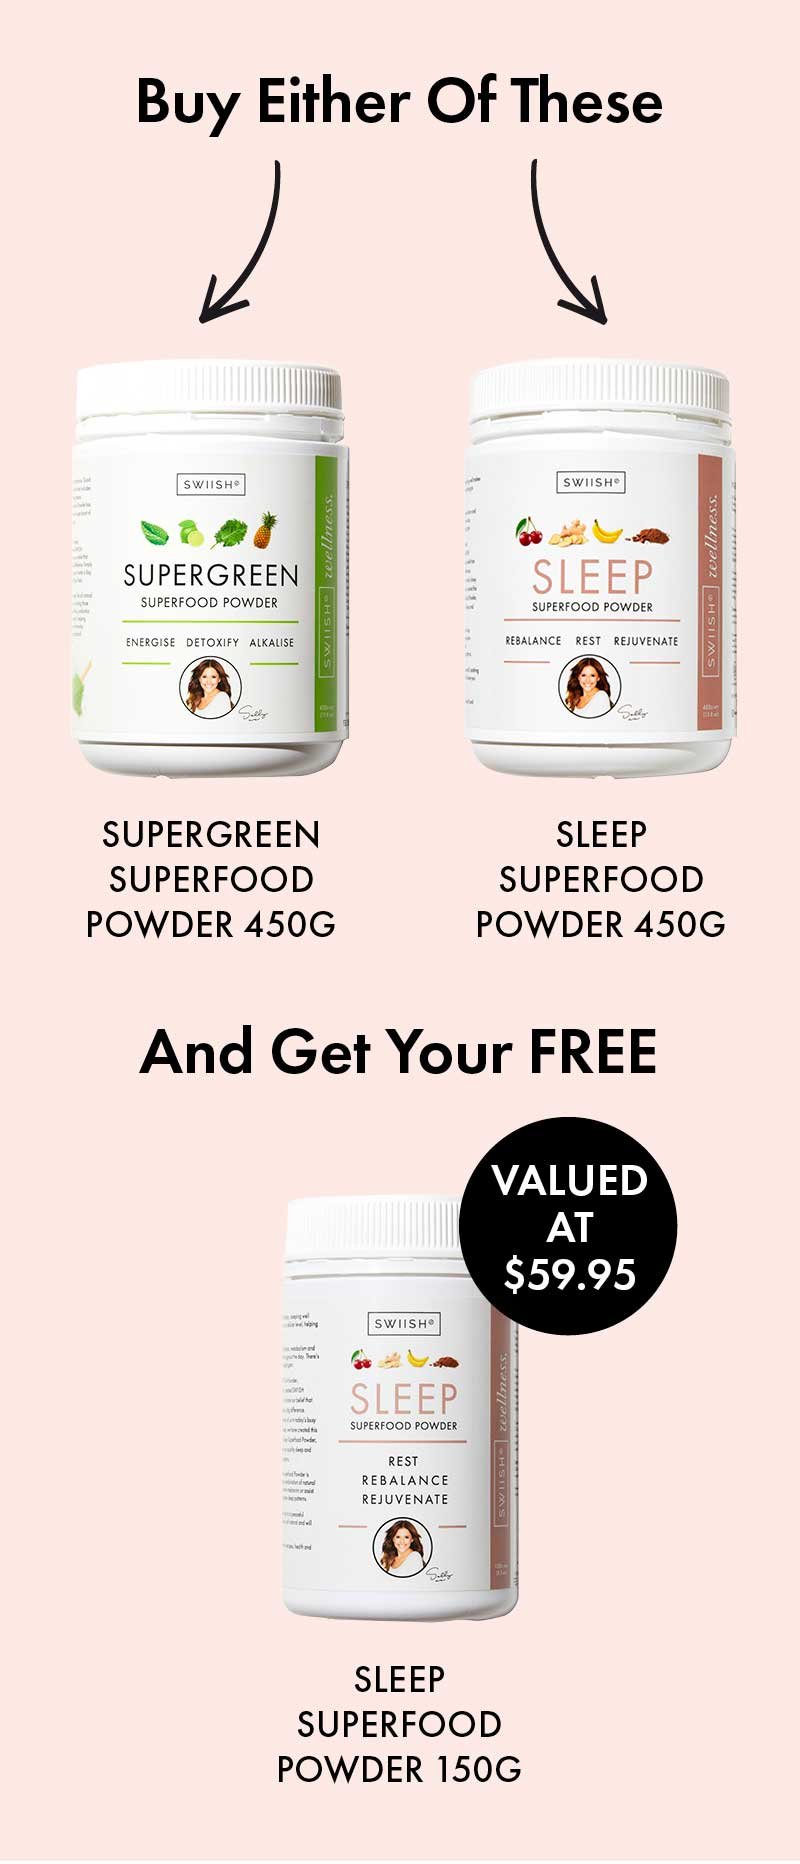 Buy a large SUPERGREEN Superfood Powder 450g or large SLEEP 450g, and get a regular SLEEP 150g… FREE!